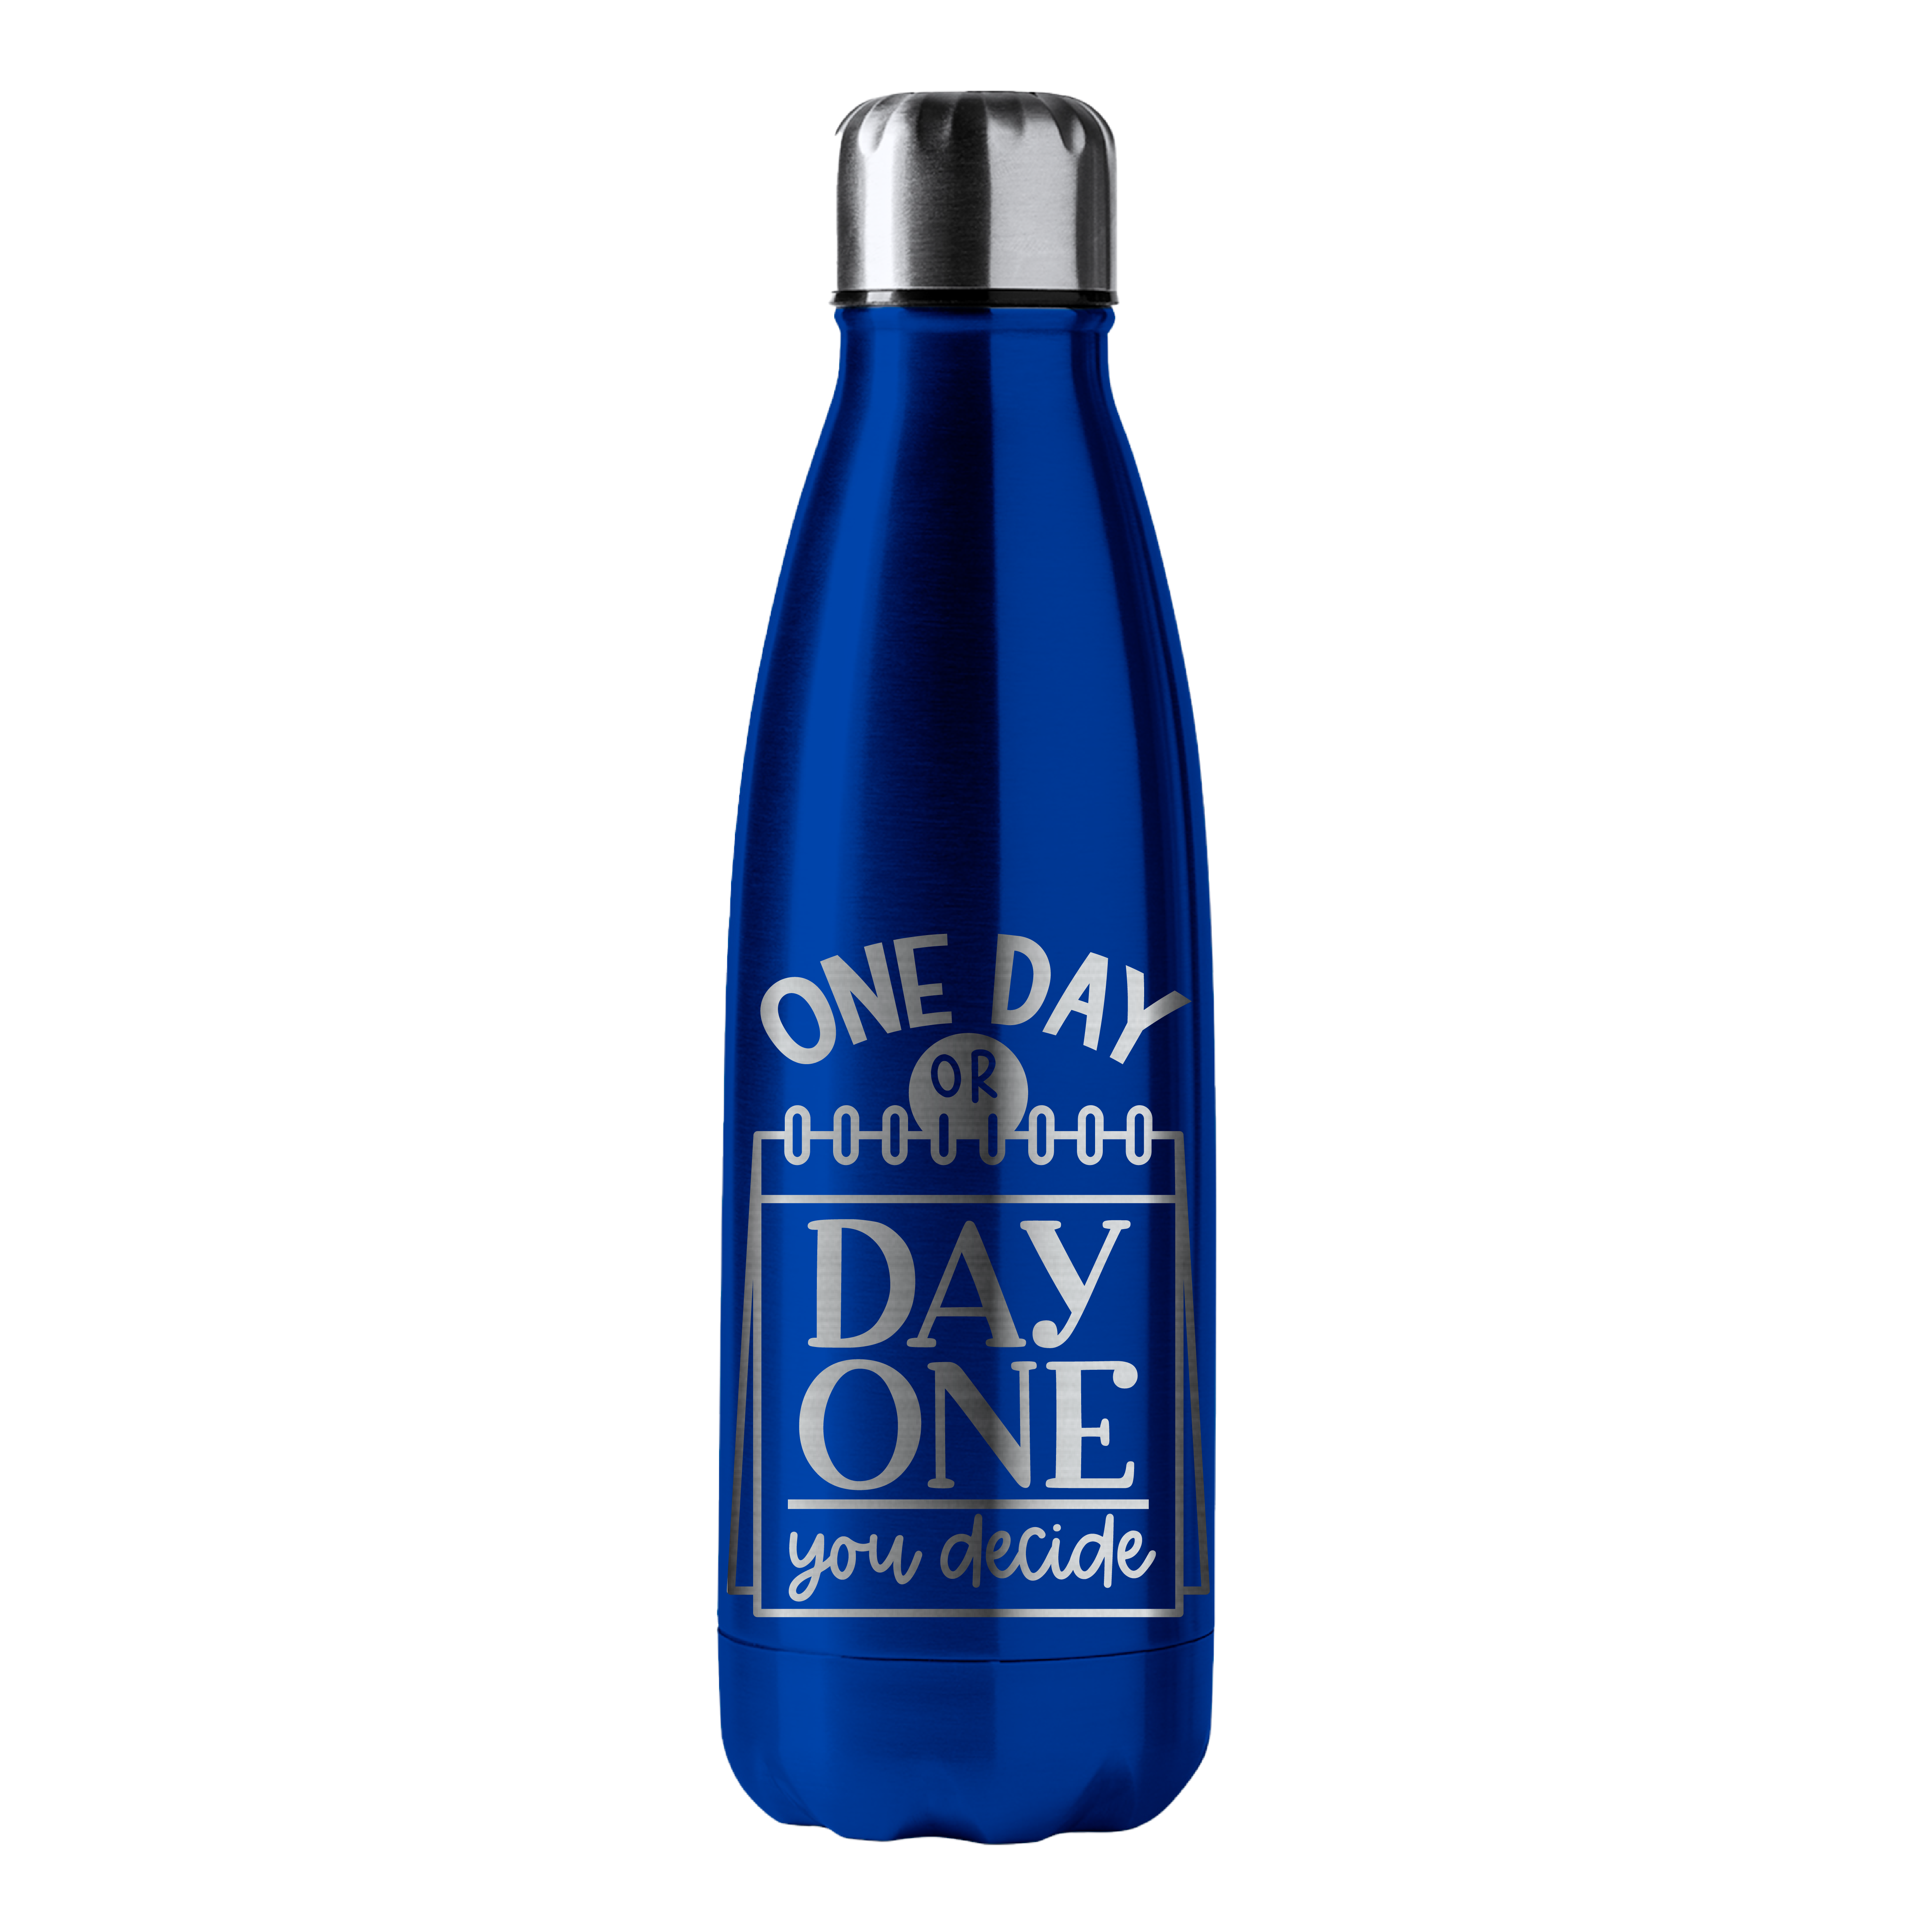 One day or day one - Thermic bottle